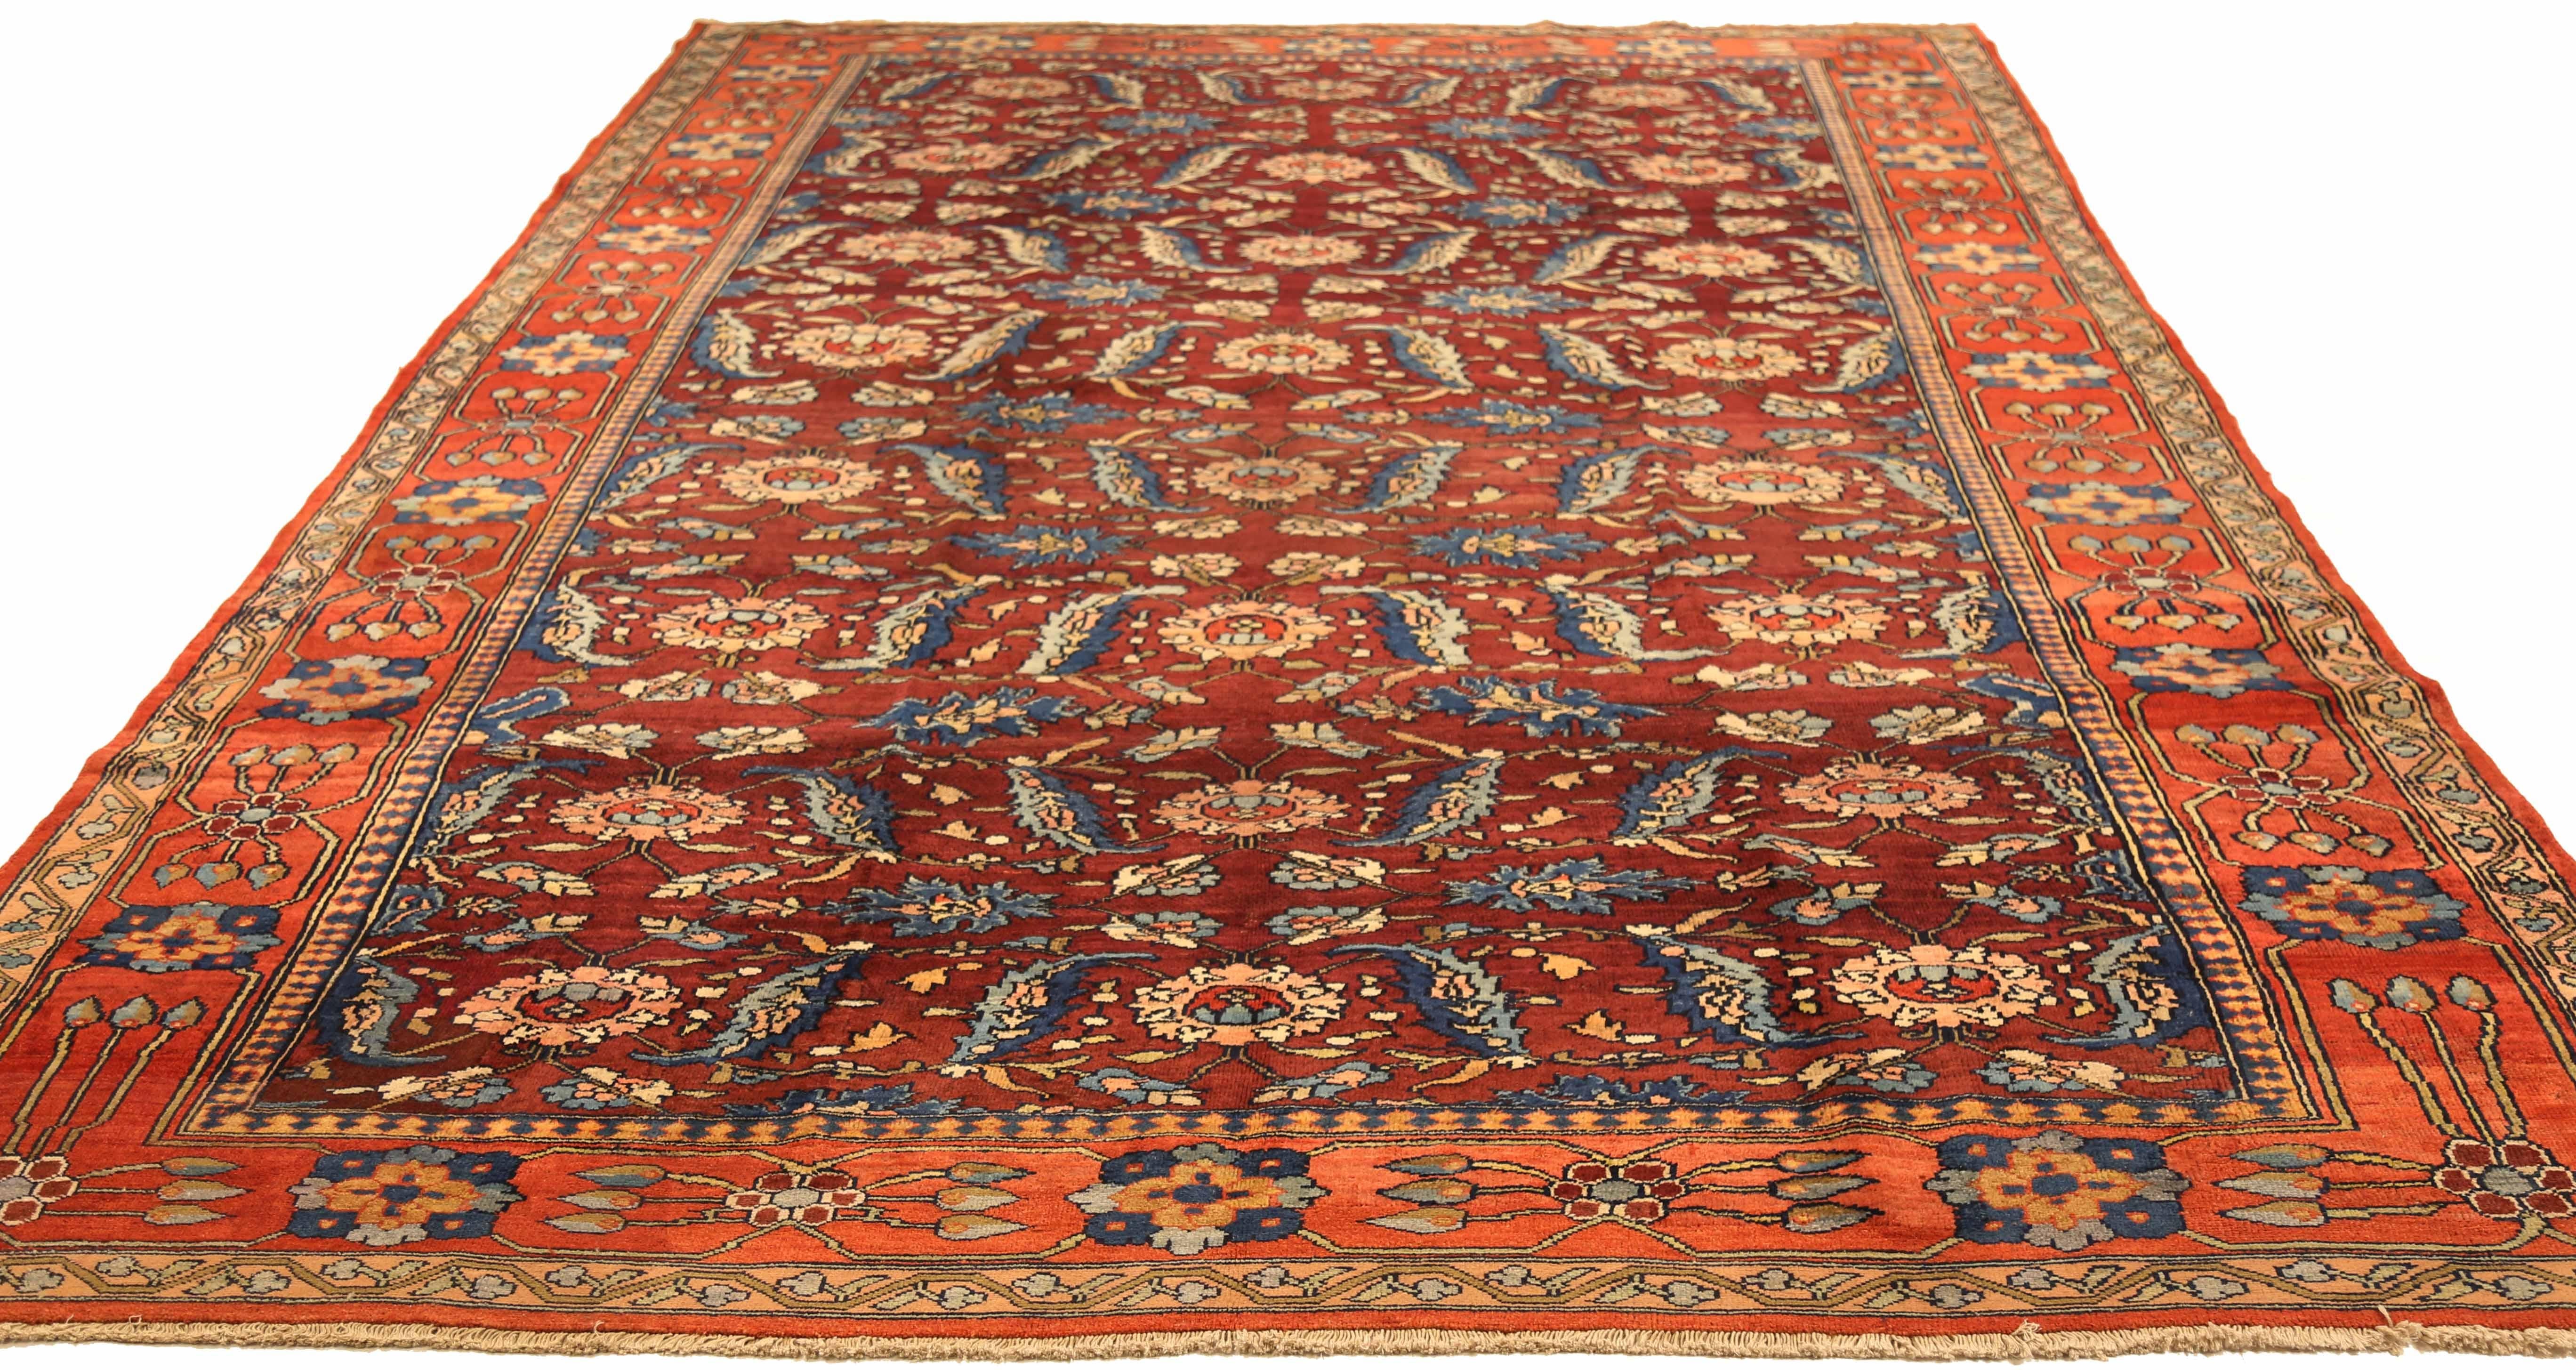 Antique Persian Mahal Area Rug: Handcrafted from premium quality sheep's wool, colored with all-natural vegetable dyes that are safe for both humans and pets. Featuring a traditional Mahal design, handwoven by skilled artisans, this vintage rug